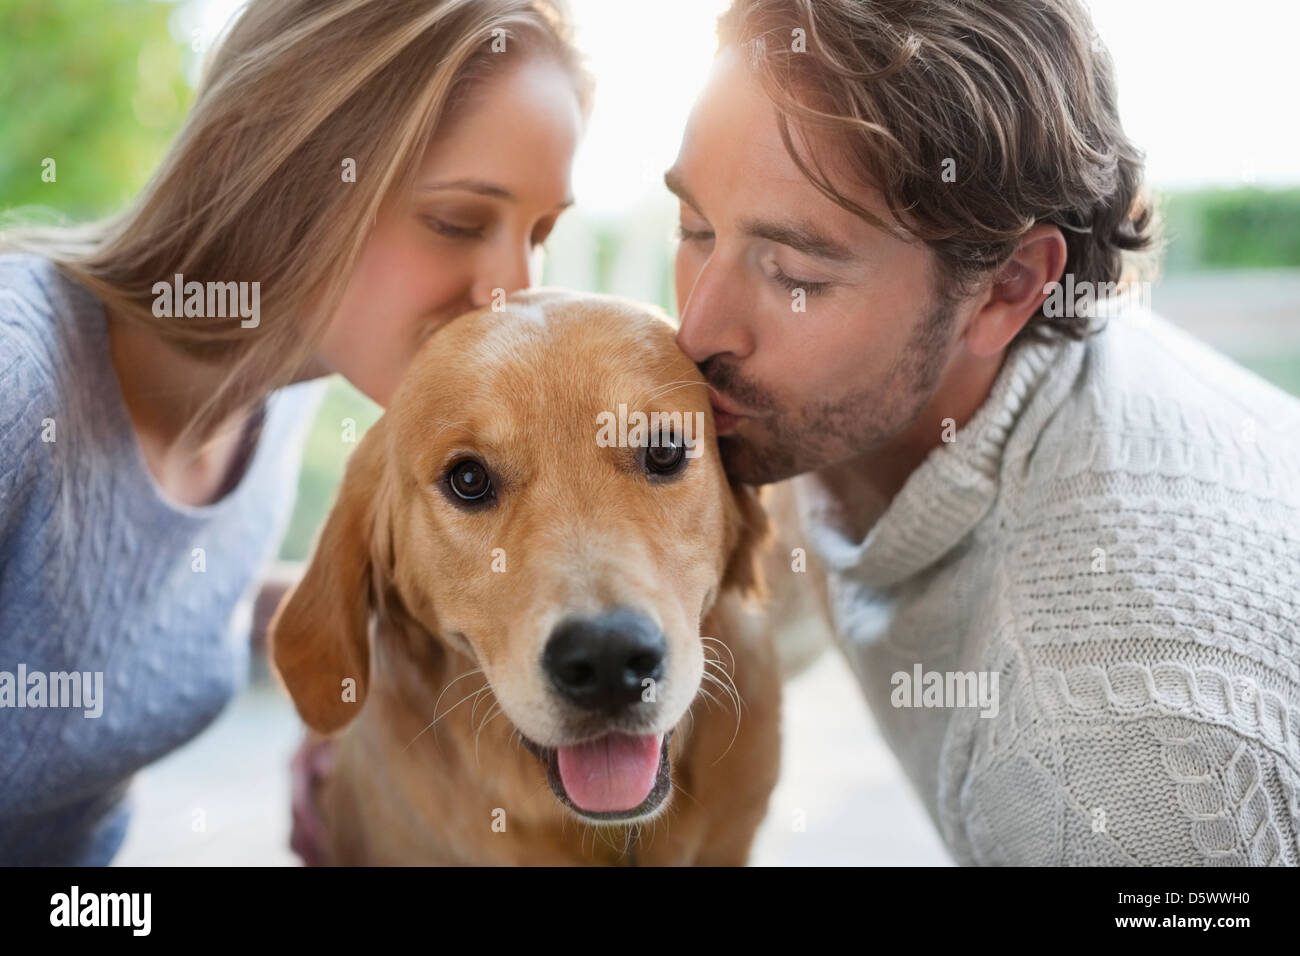 Couple kissing dog indoors Banque D'Images